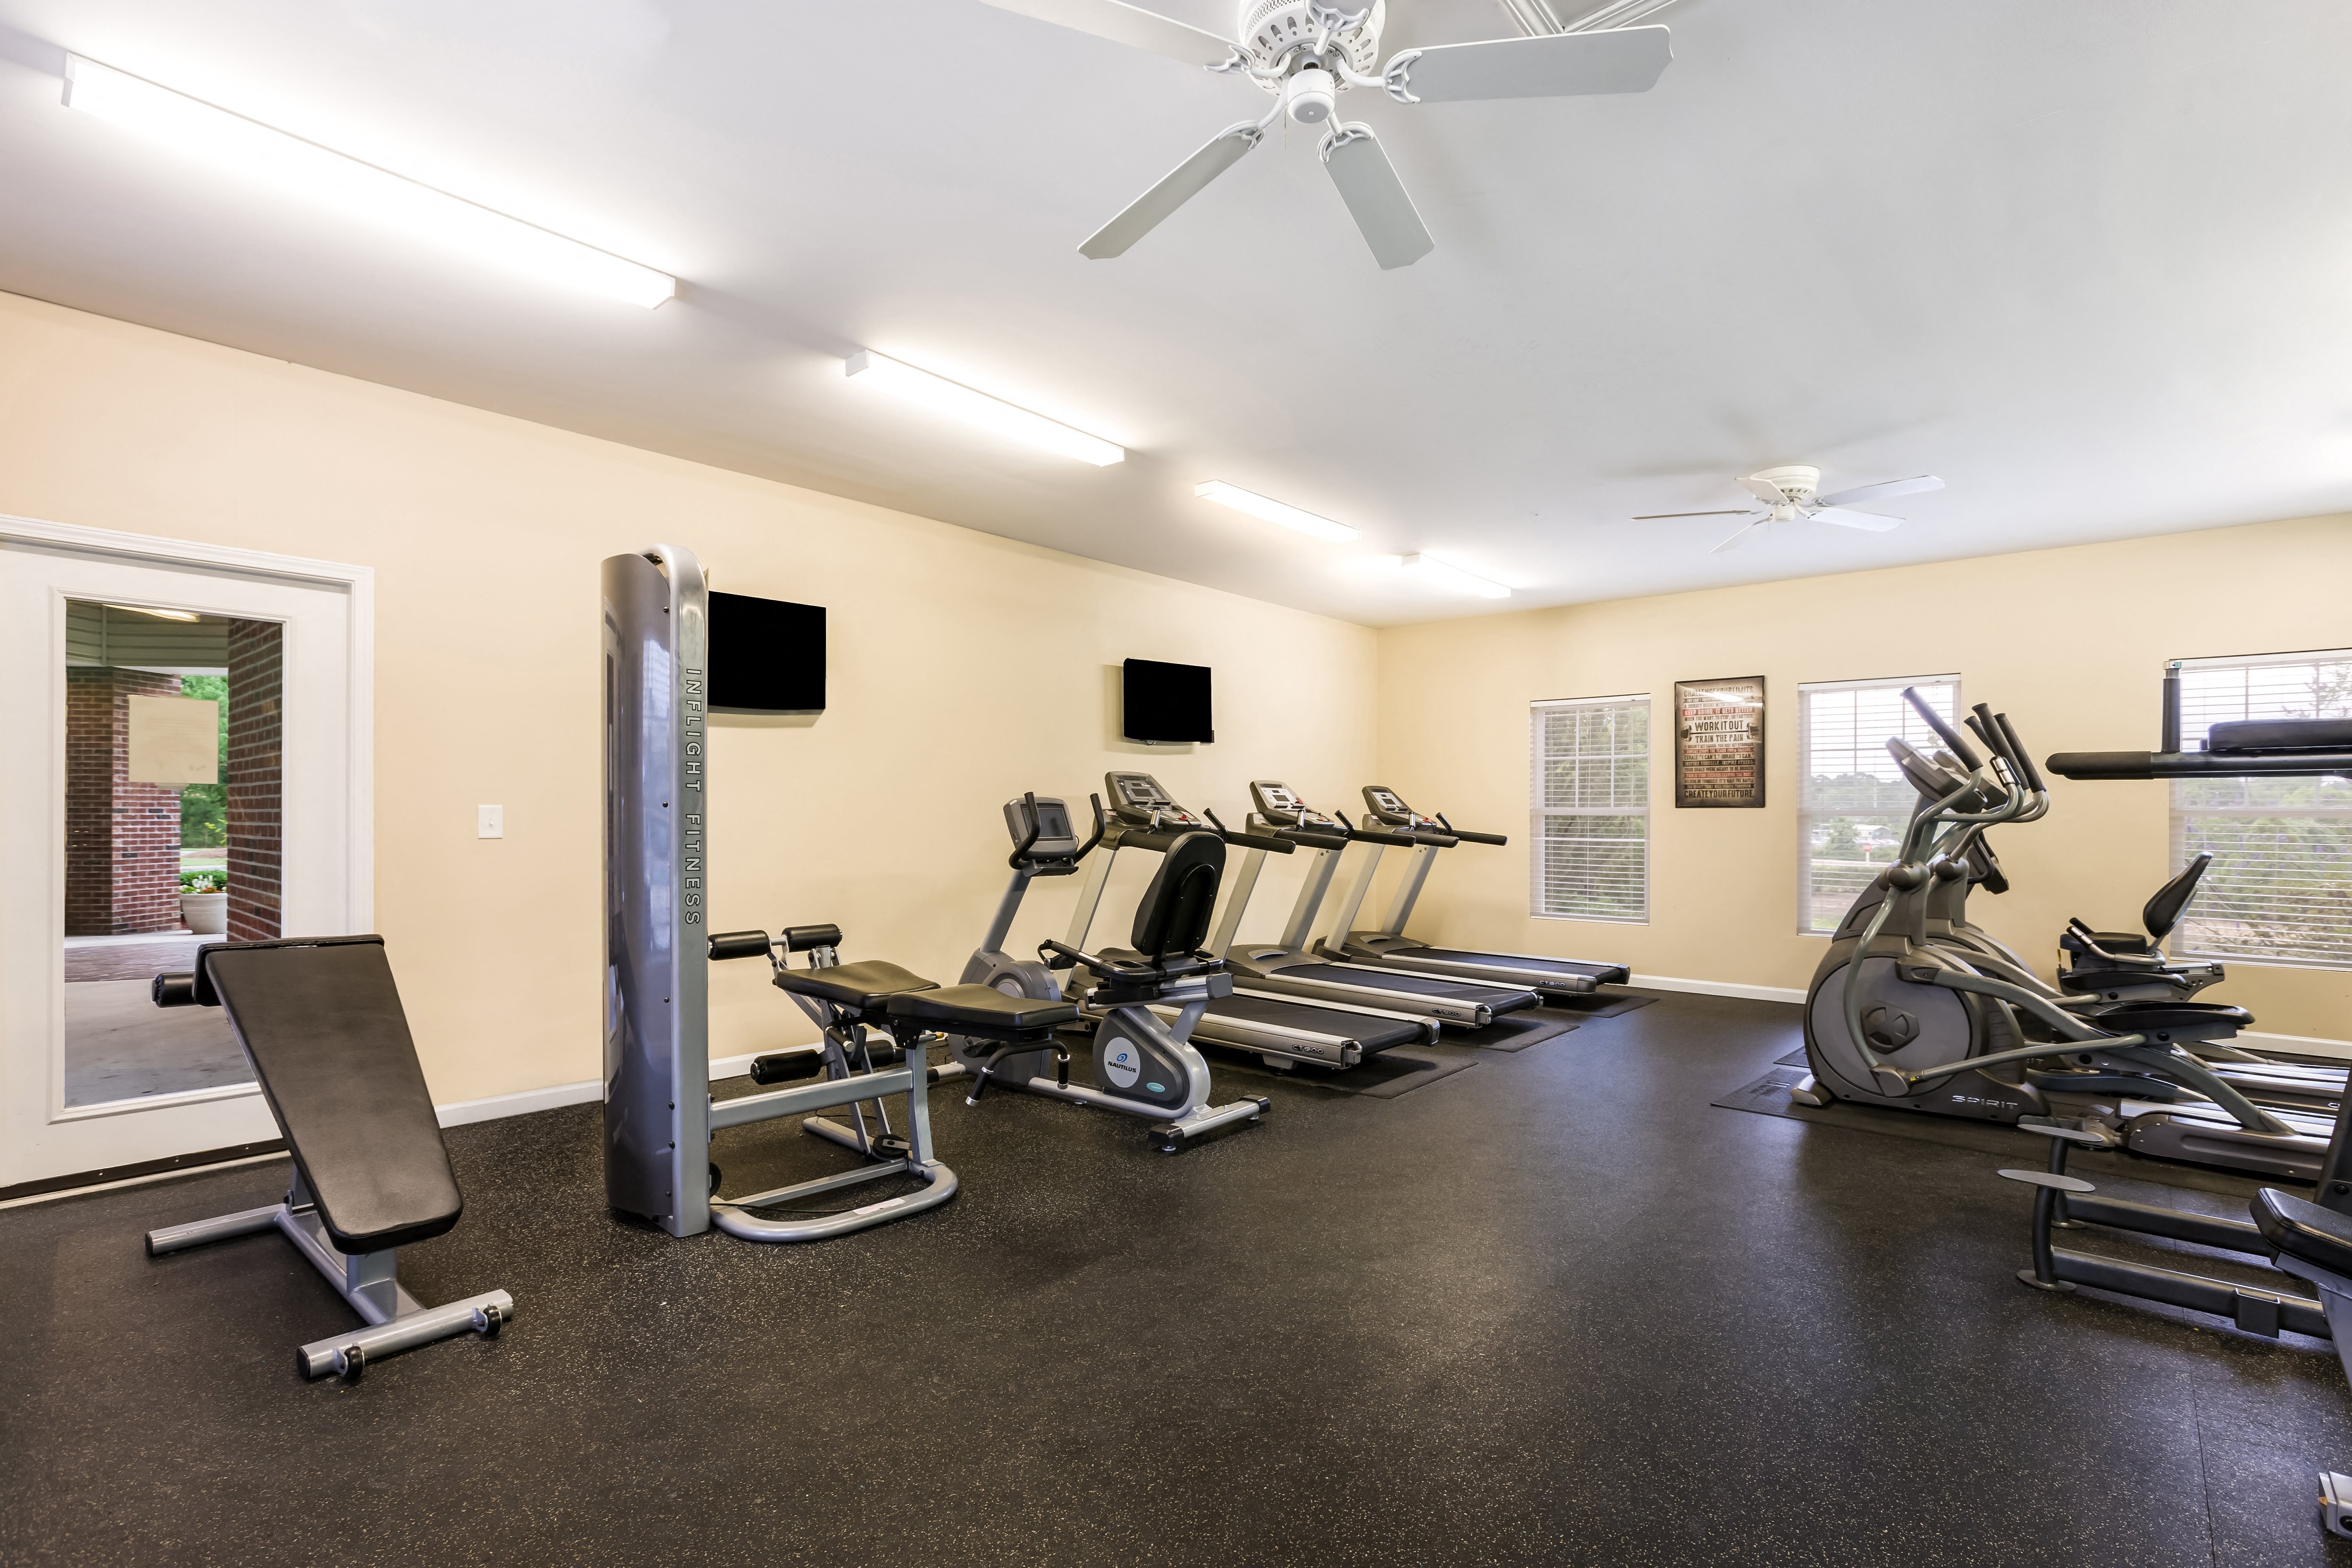 Fitness center at the Summit on 401